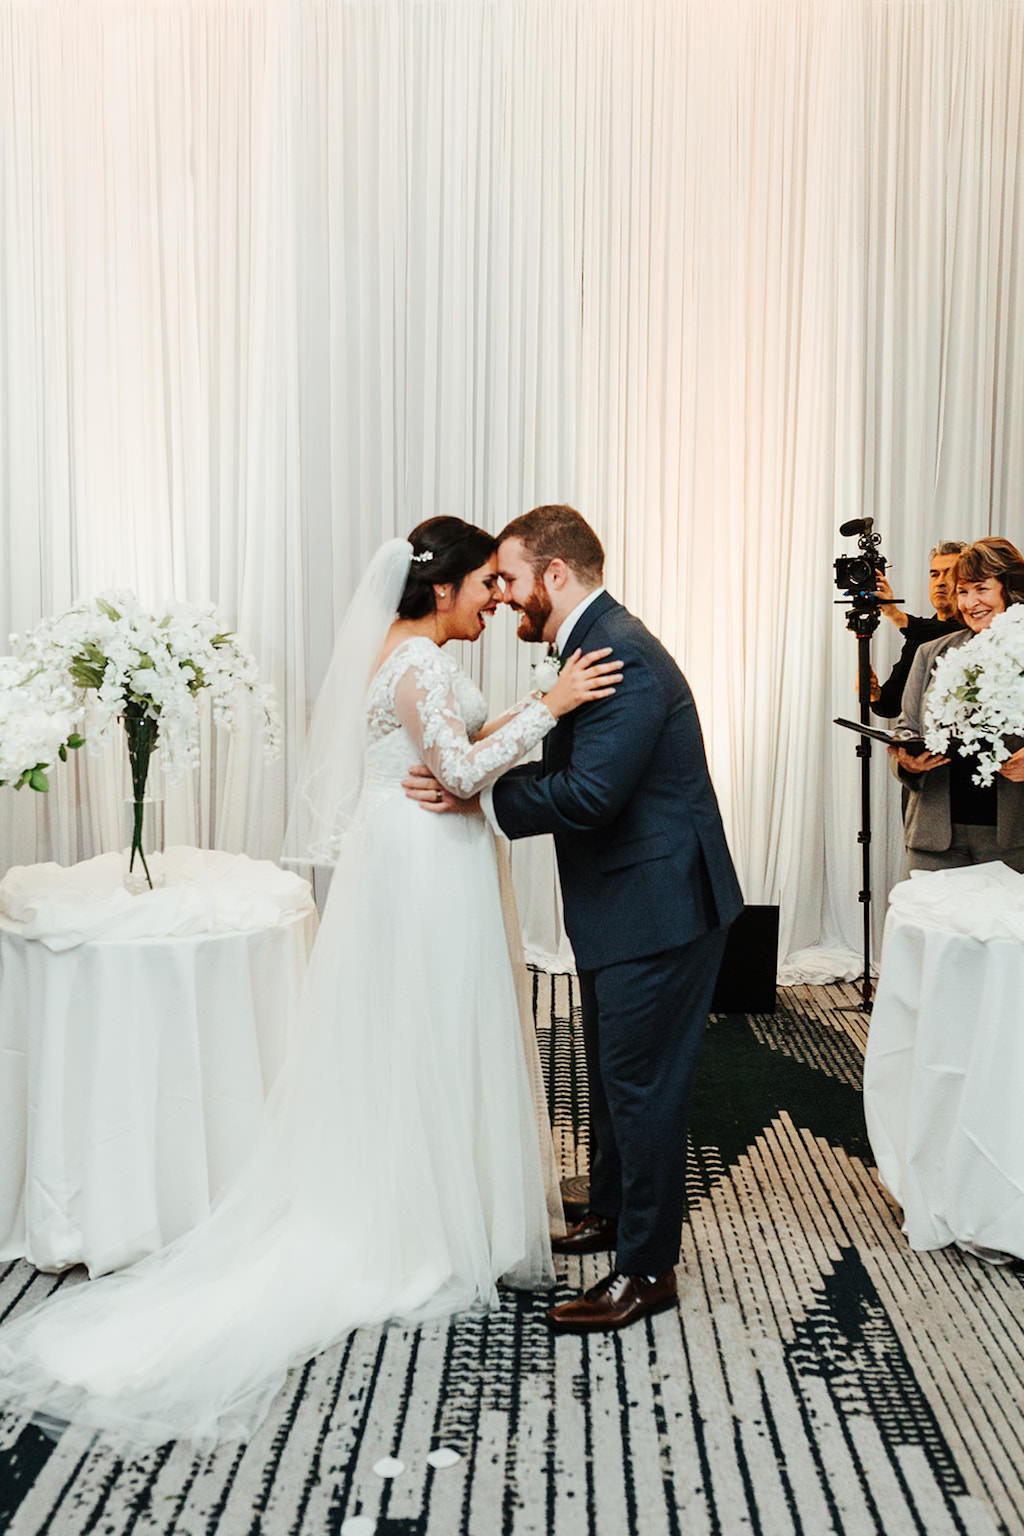 Tampa Bride and Groom Embrace During Wedding Ceremony, White Floral Decor and Draping | Florida Boutique Hotel and Wedding Venue The Hotel Alba in Westshore | Gabro Event Services